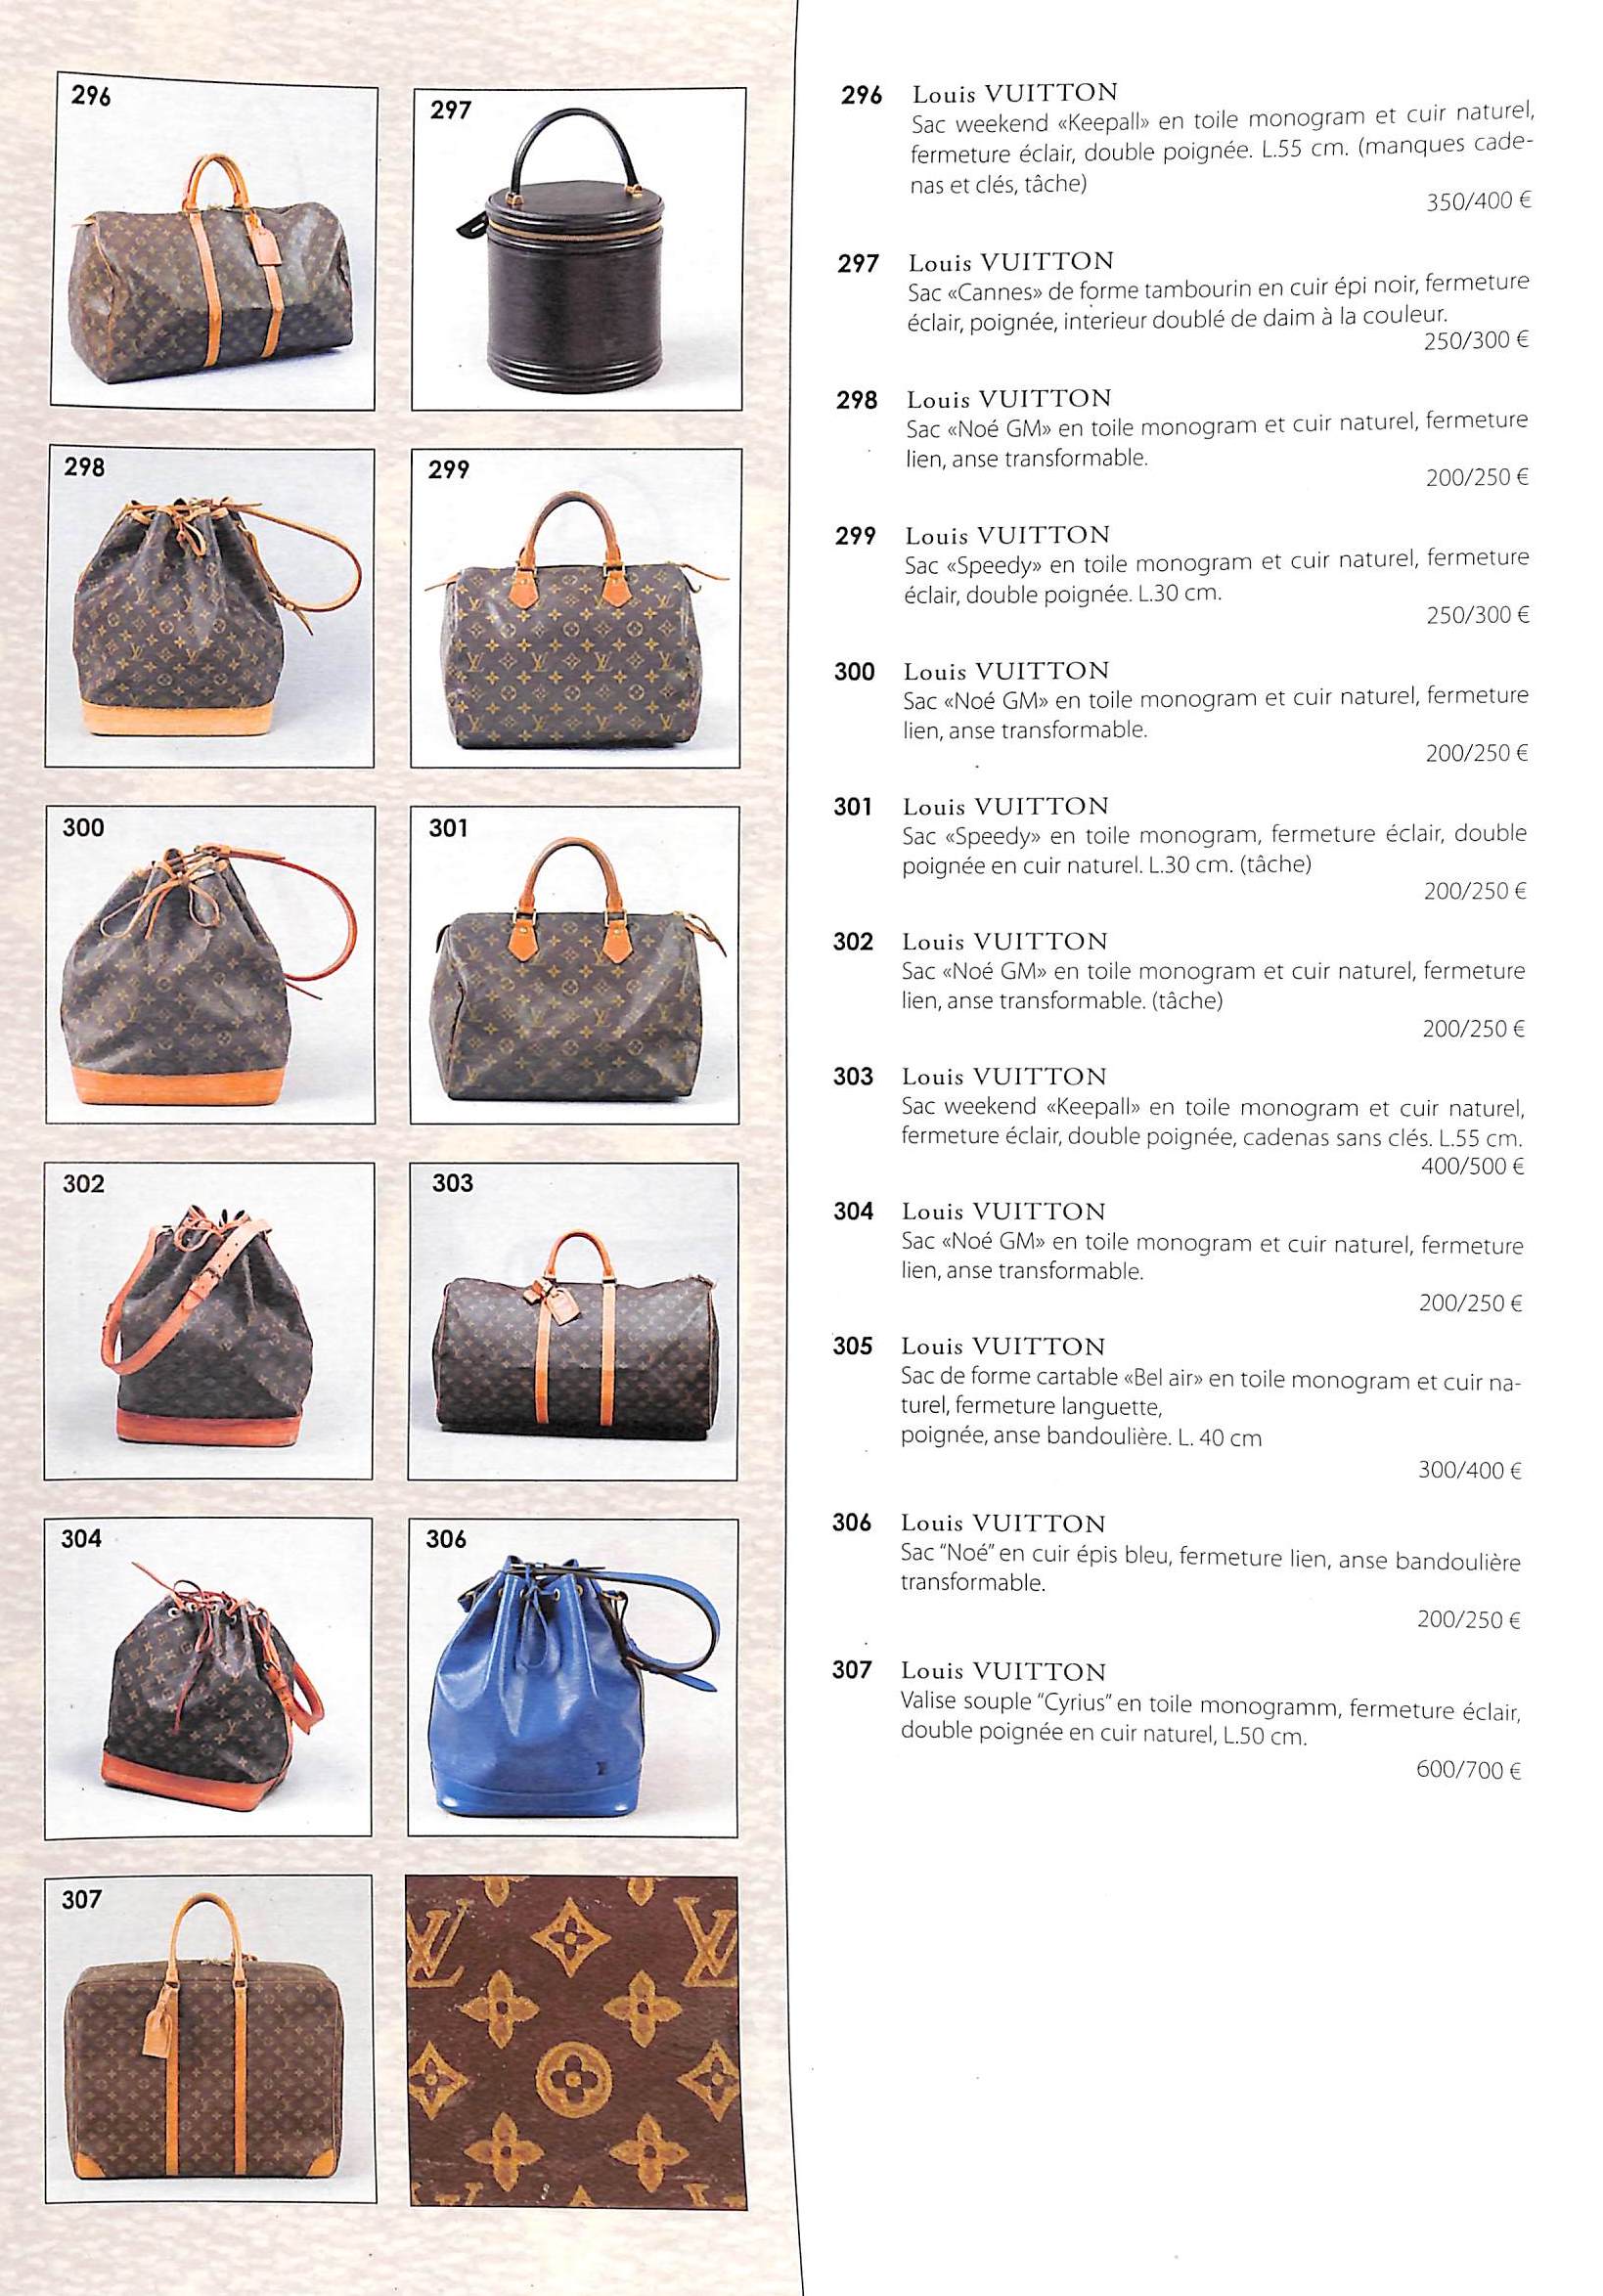 Louis Vuitton Luggage for Sale at Auction